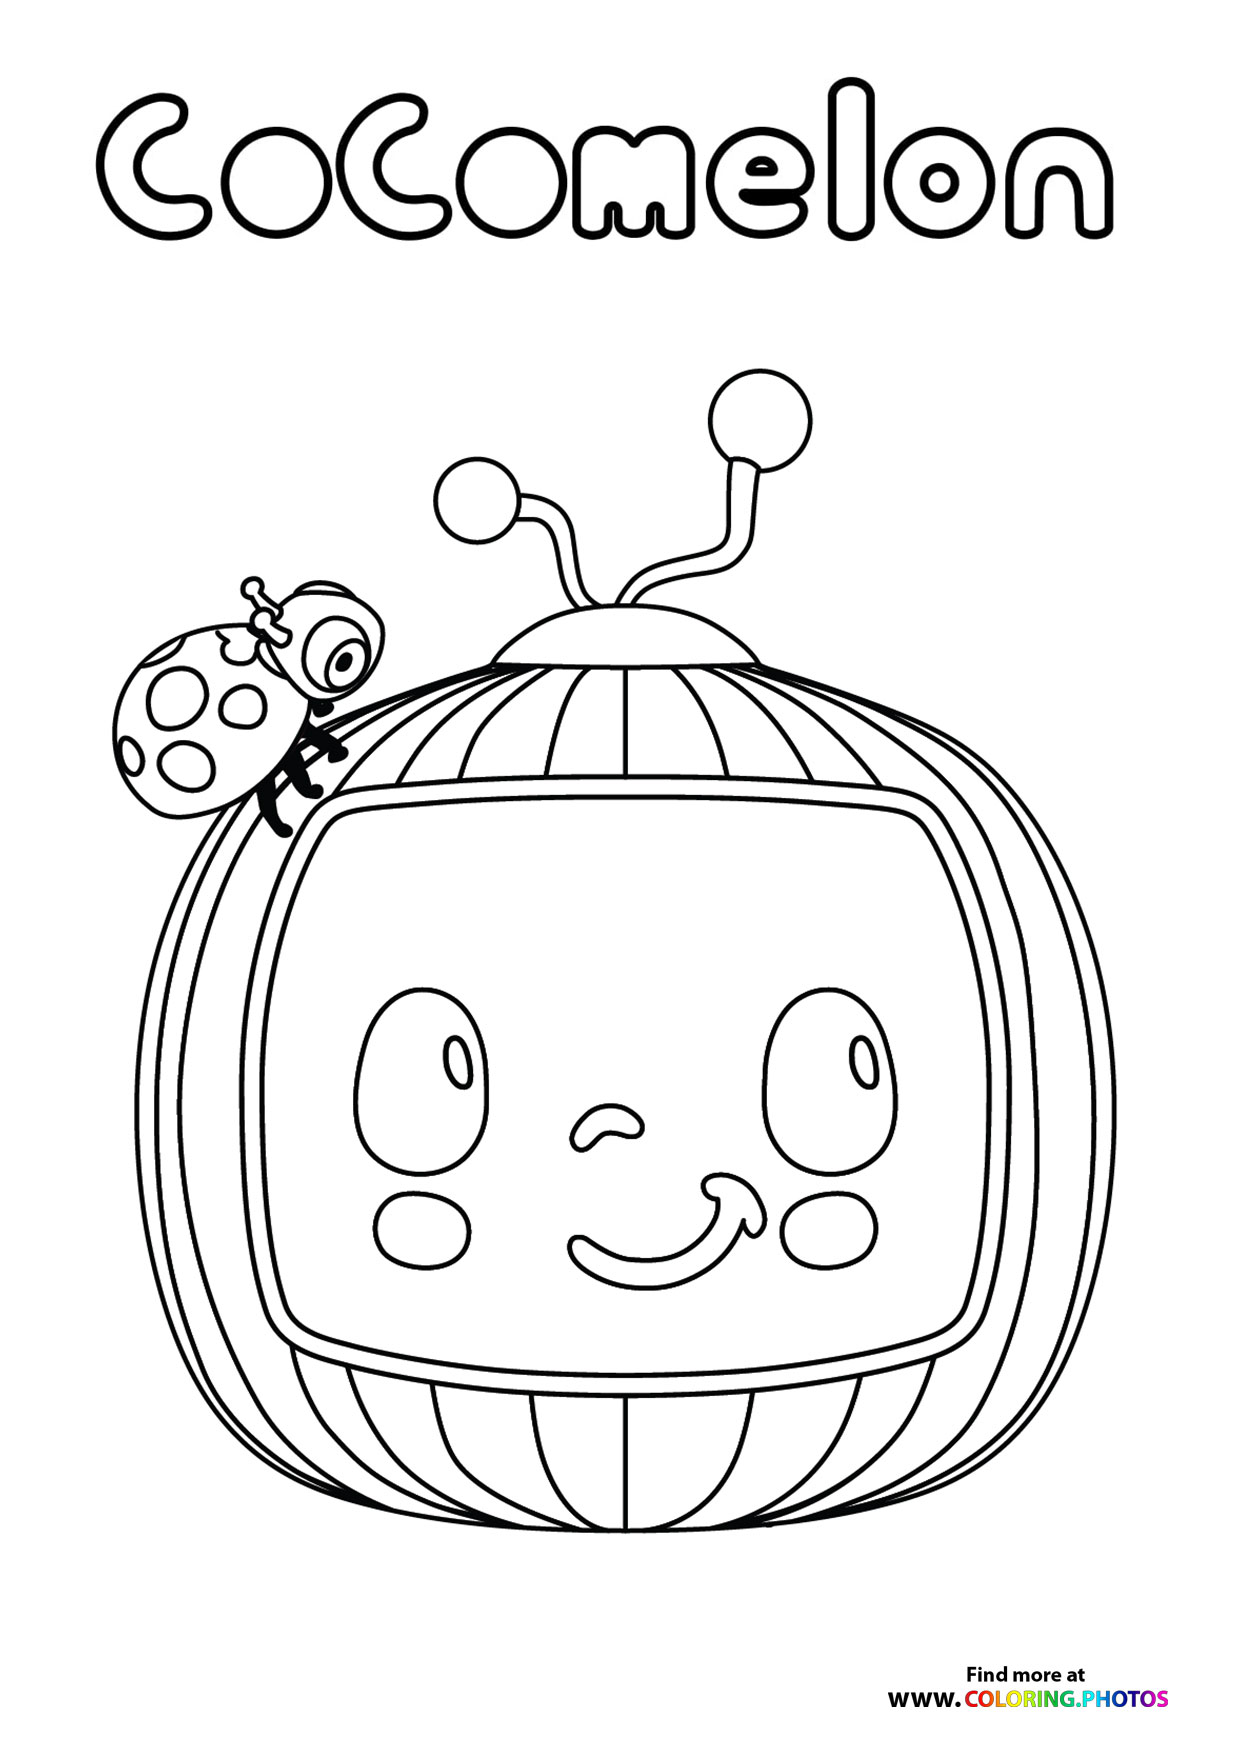 CoComelon Coloring Pages   Free Print Or Download Of CoComelon ...